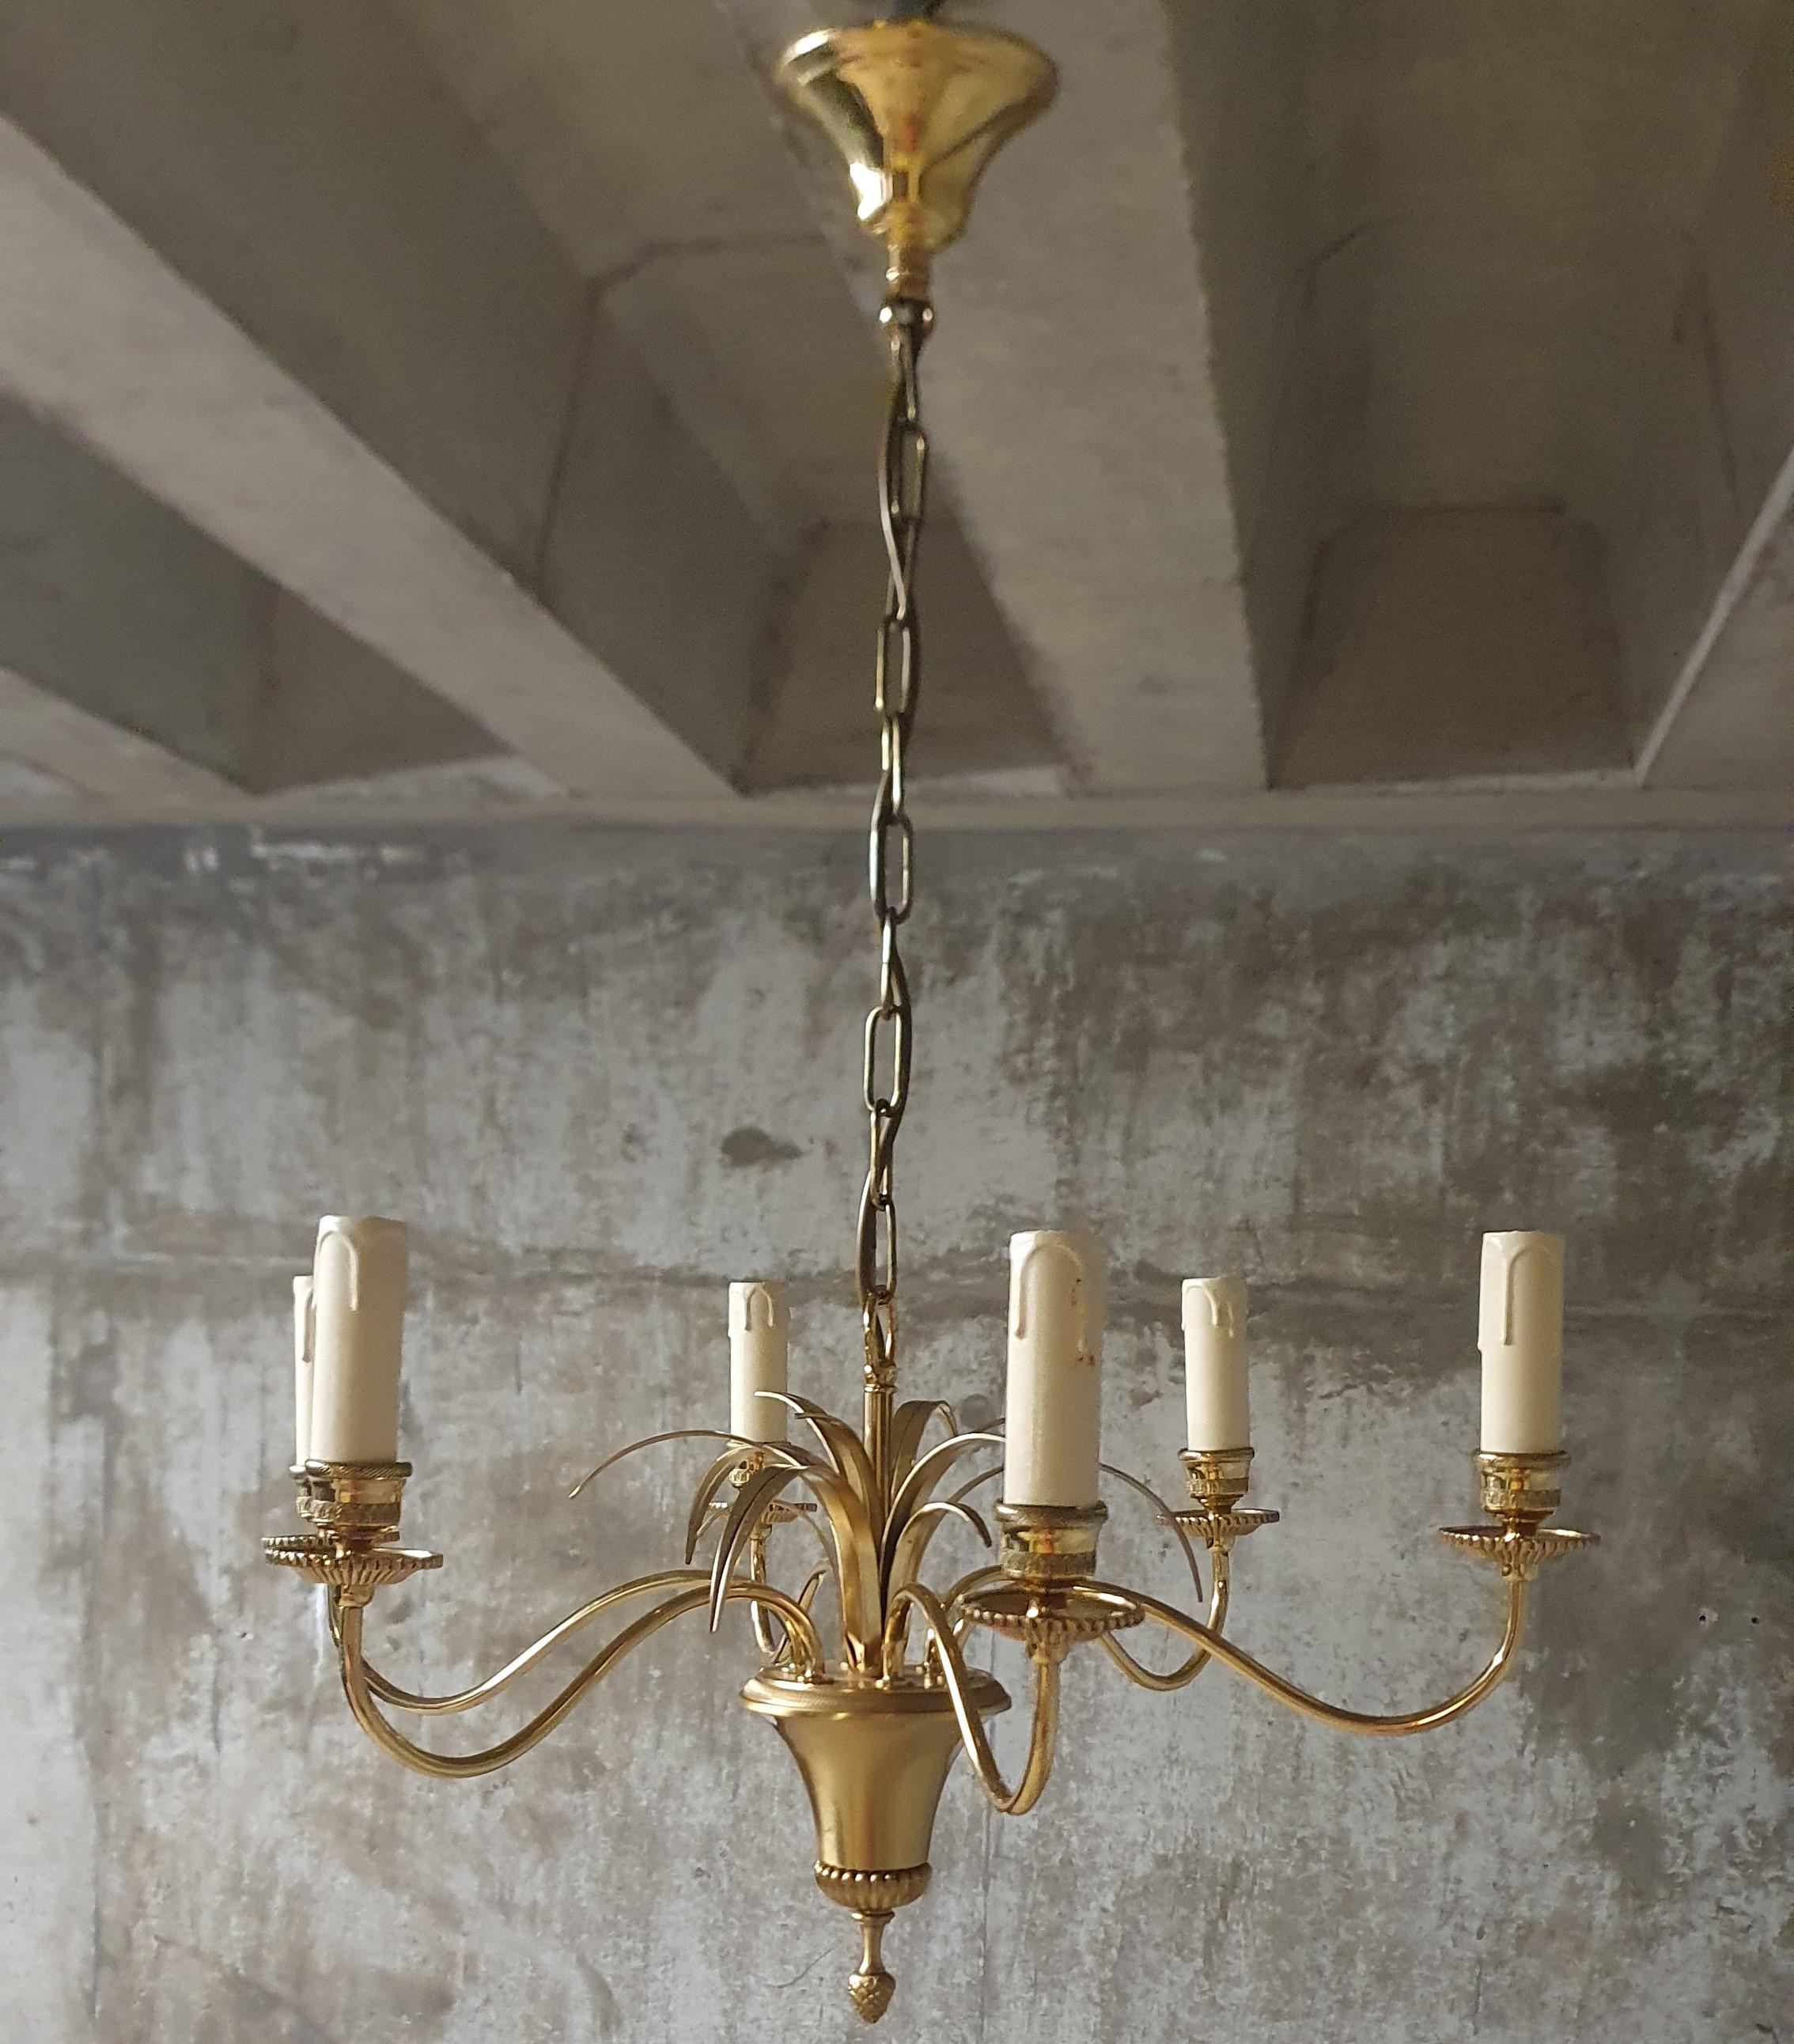 This is a beautiful small chandelier by the renowned French manufacturer S.A. Boulanger in exceptionally good condition

Made of hand cast and carved Bronze and Brass in combination of Matt and Shiny plated Gold finish this 6 arm chandelier features